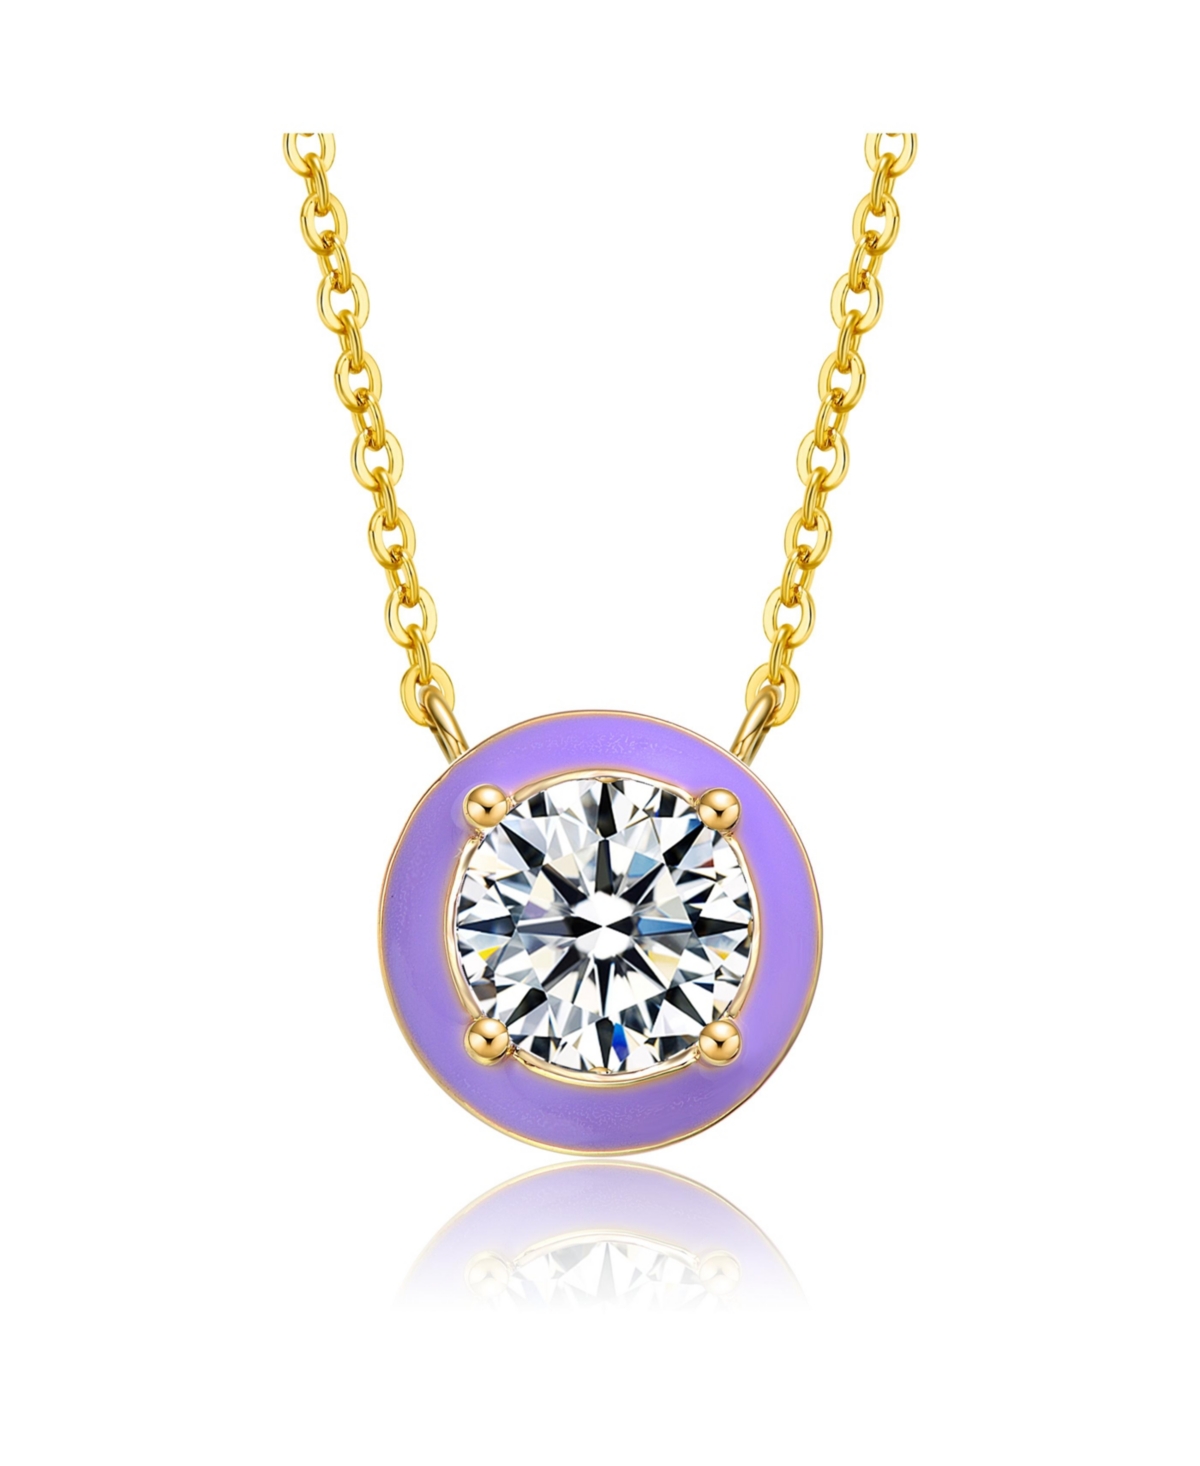 Teens 14k Yellow Gold with Cubic Zirconia Solitaire Blue Enamel Petite Halo Pendant Layering Necklace - Gold